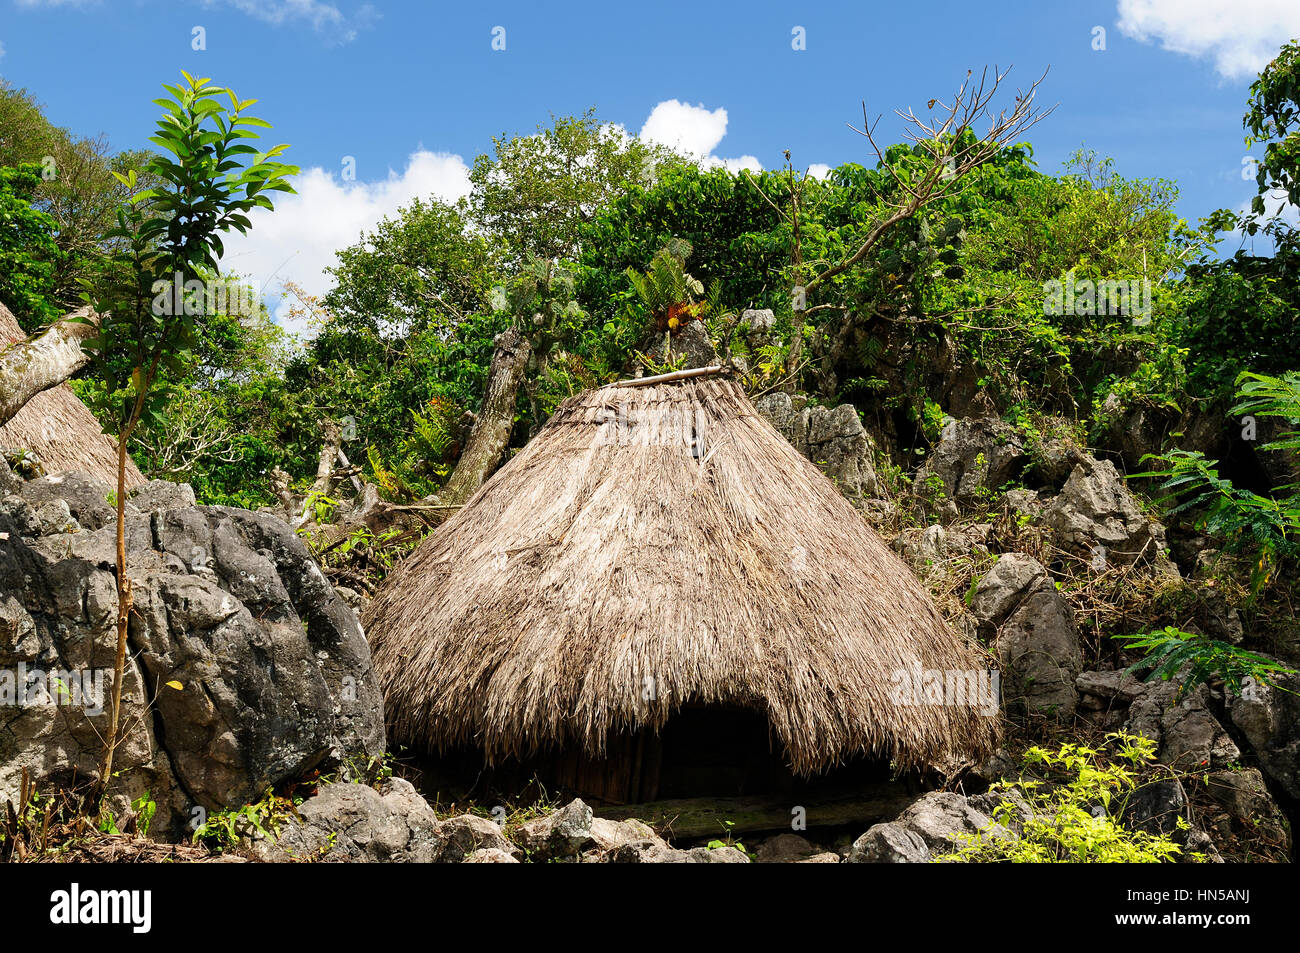 Straw house in the ethnic village on an Timor island Stock Photo